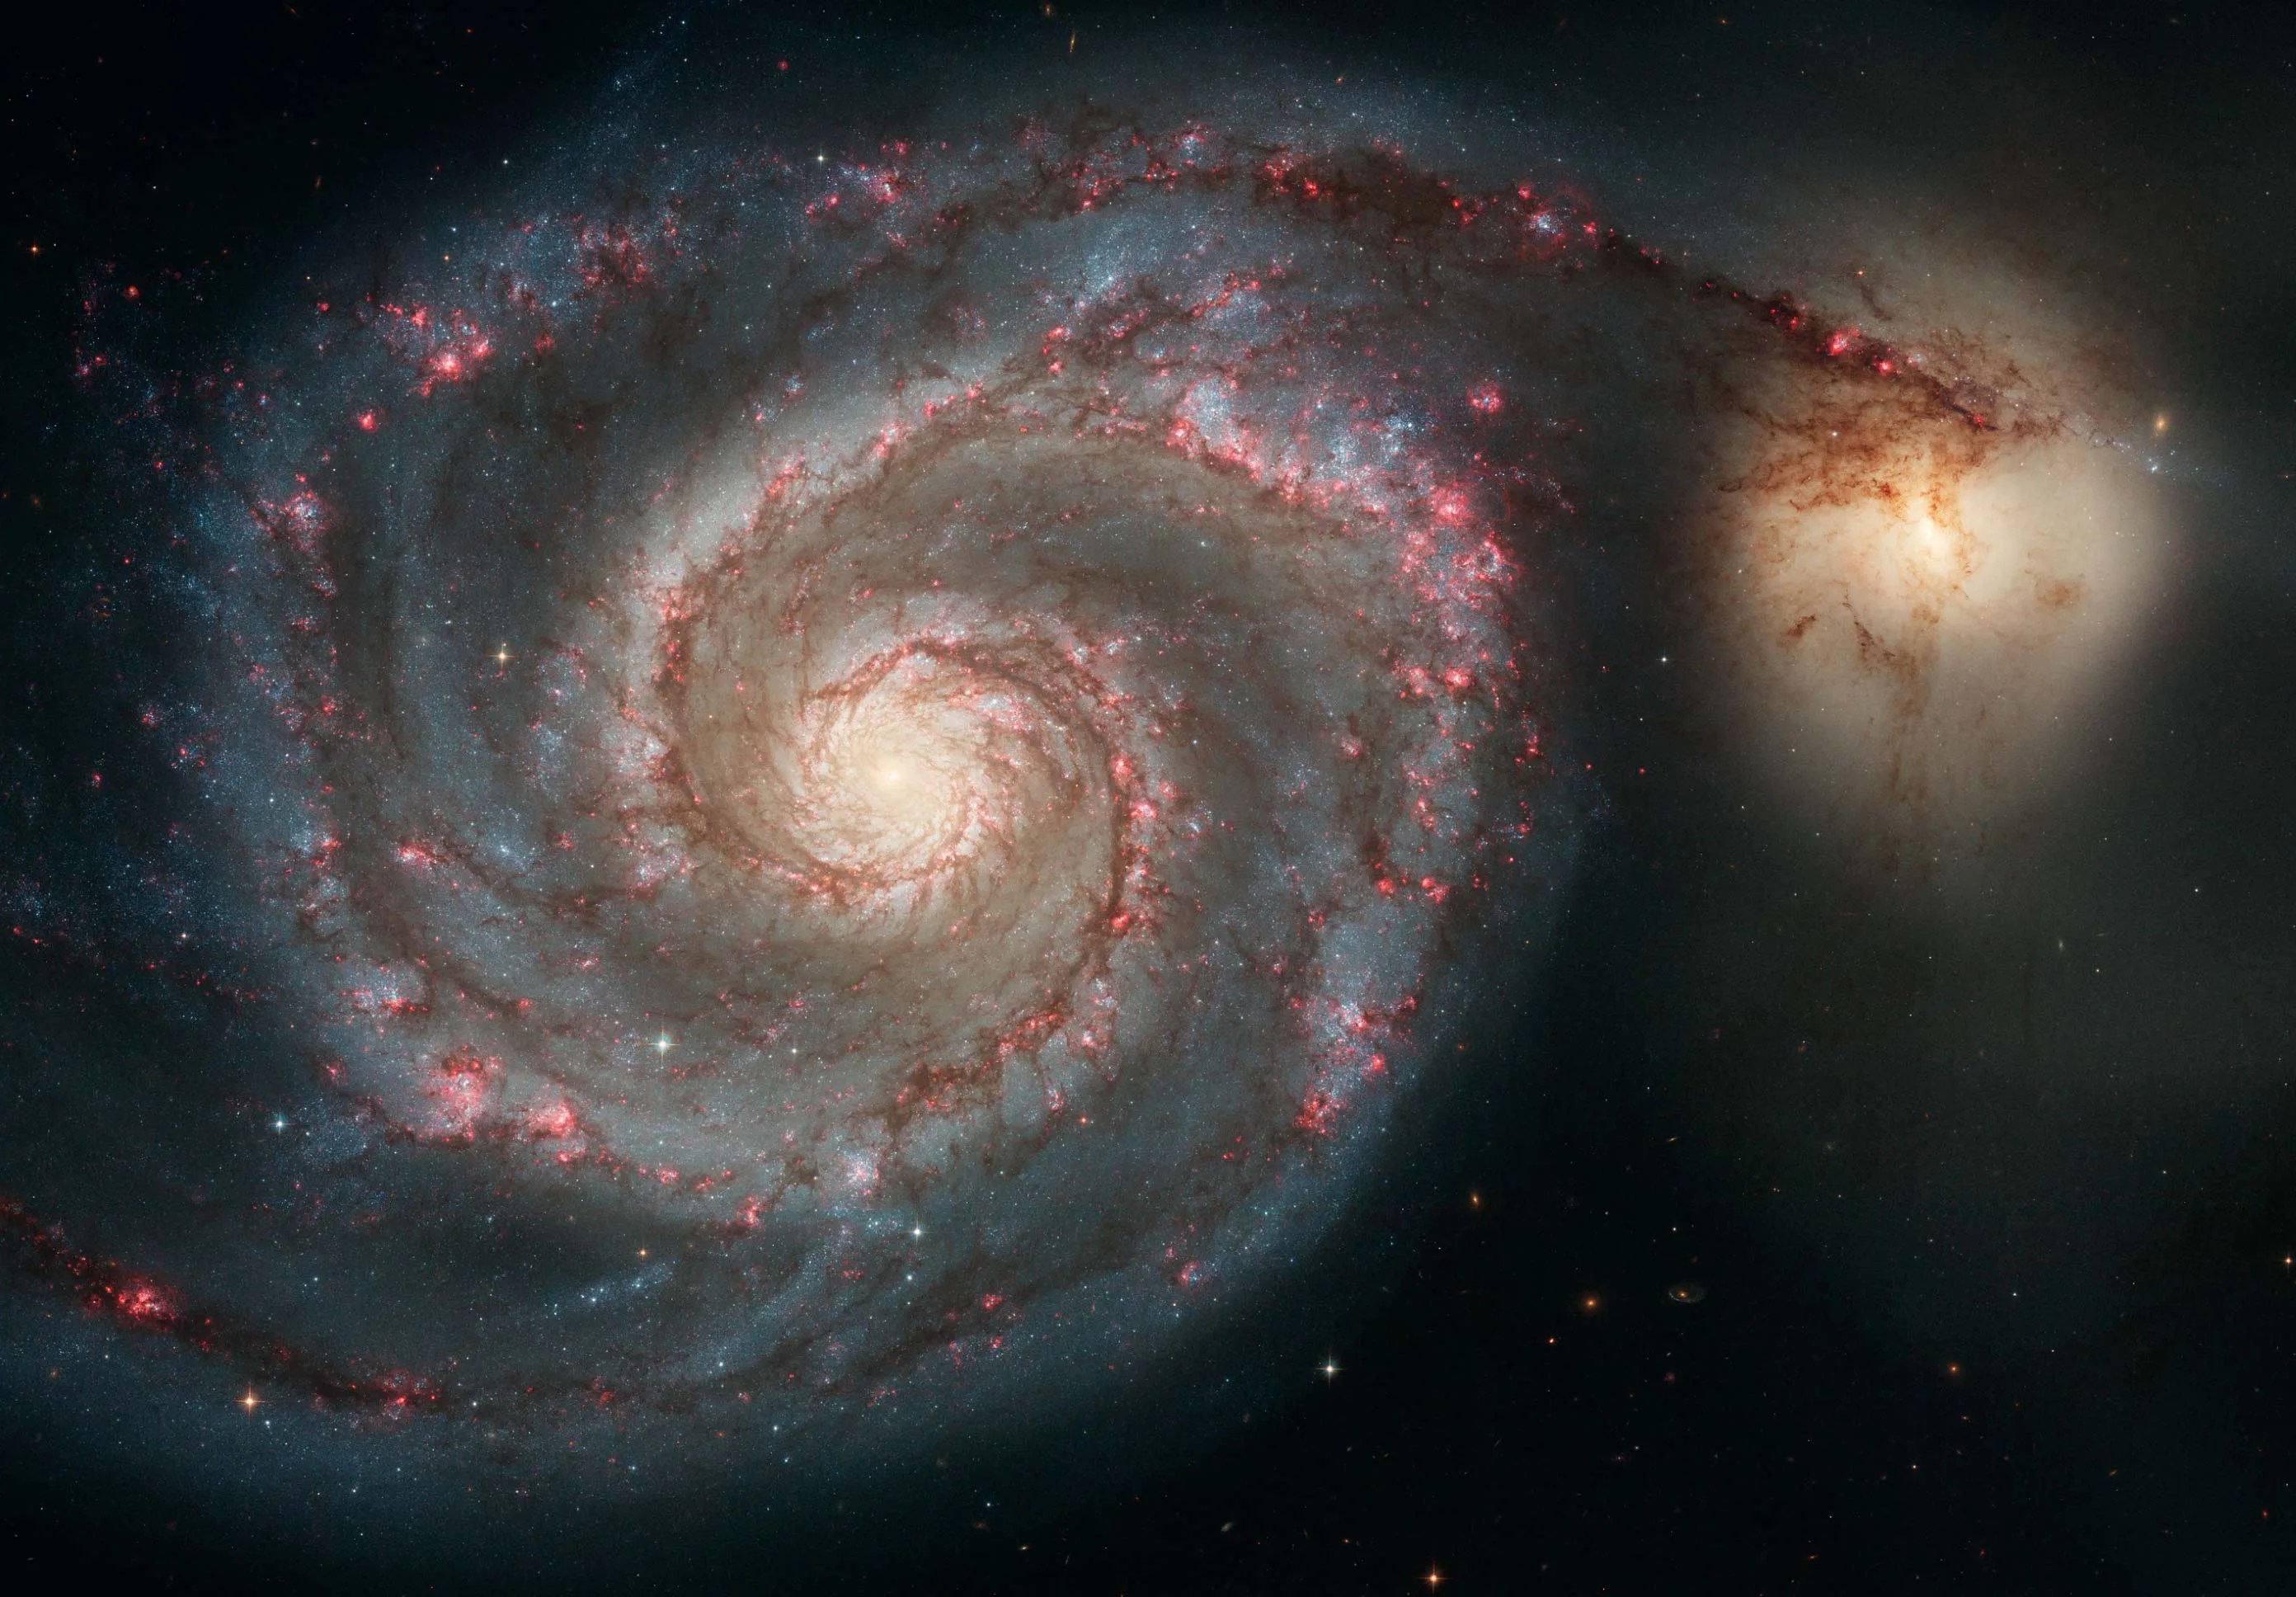 The Whirlpool Galaxy and NGC 5195